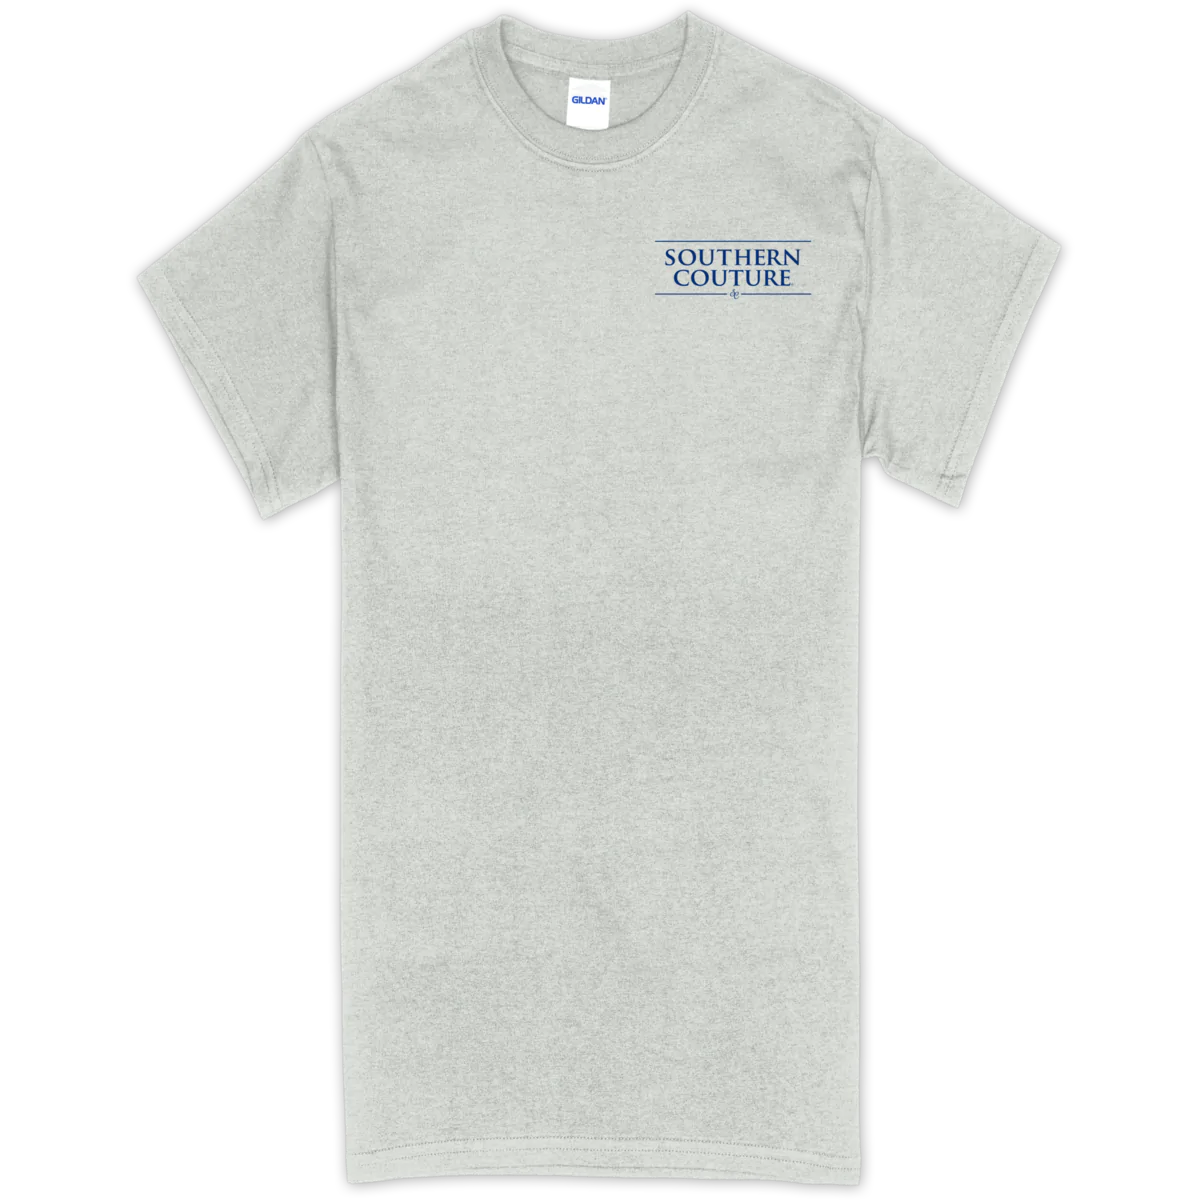 LIVE MORE WORRY LESS- SC CLASSIC TEE